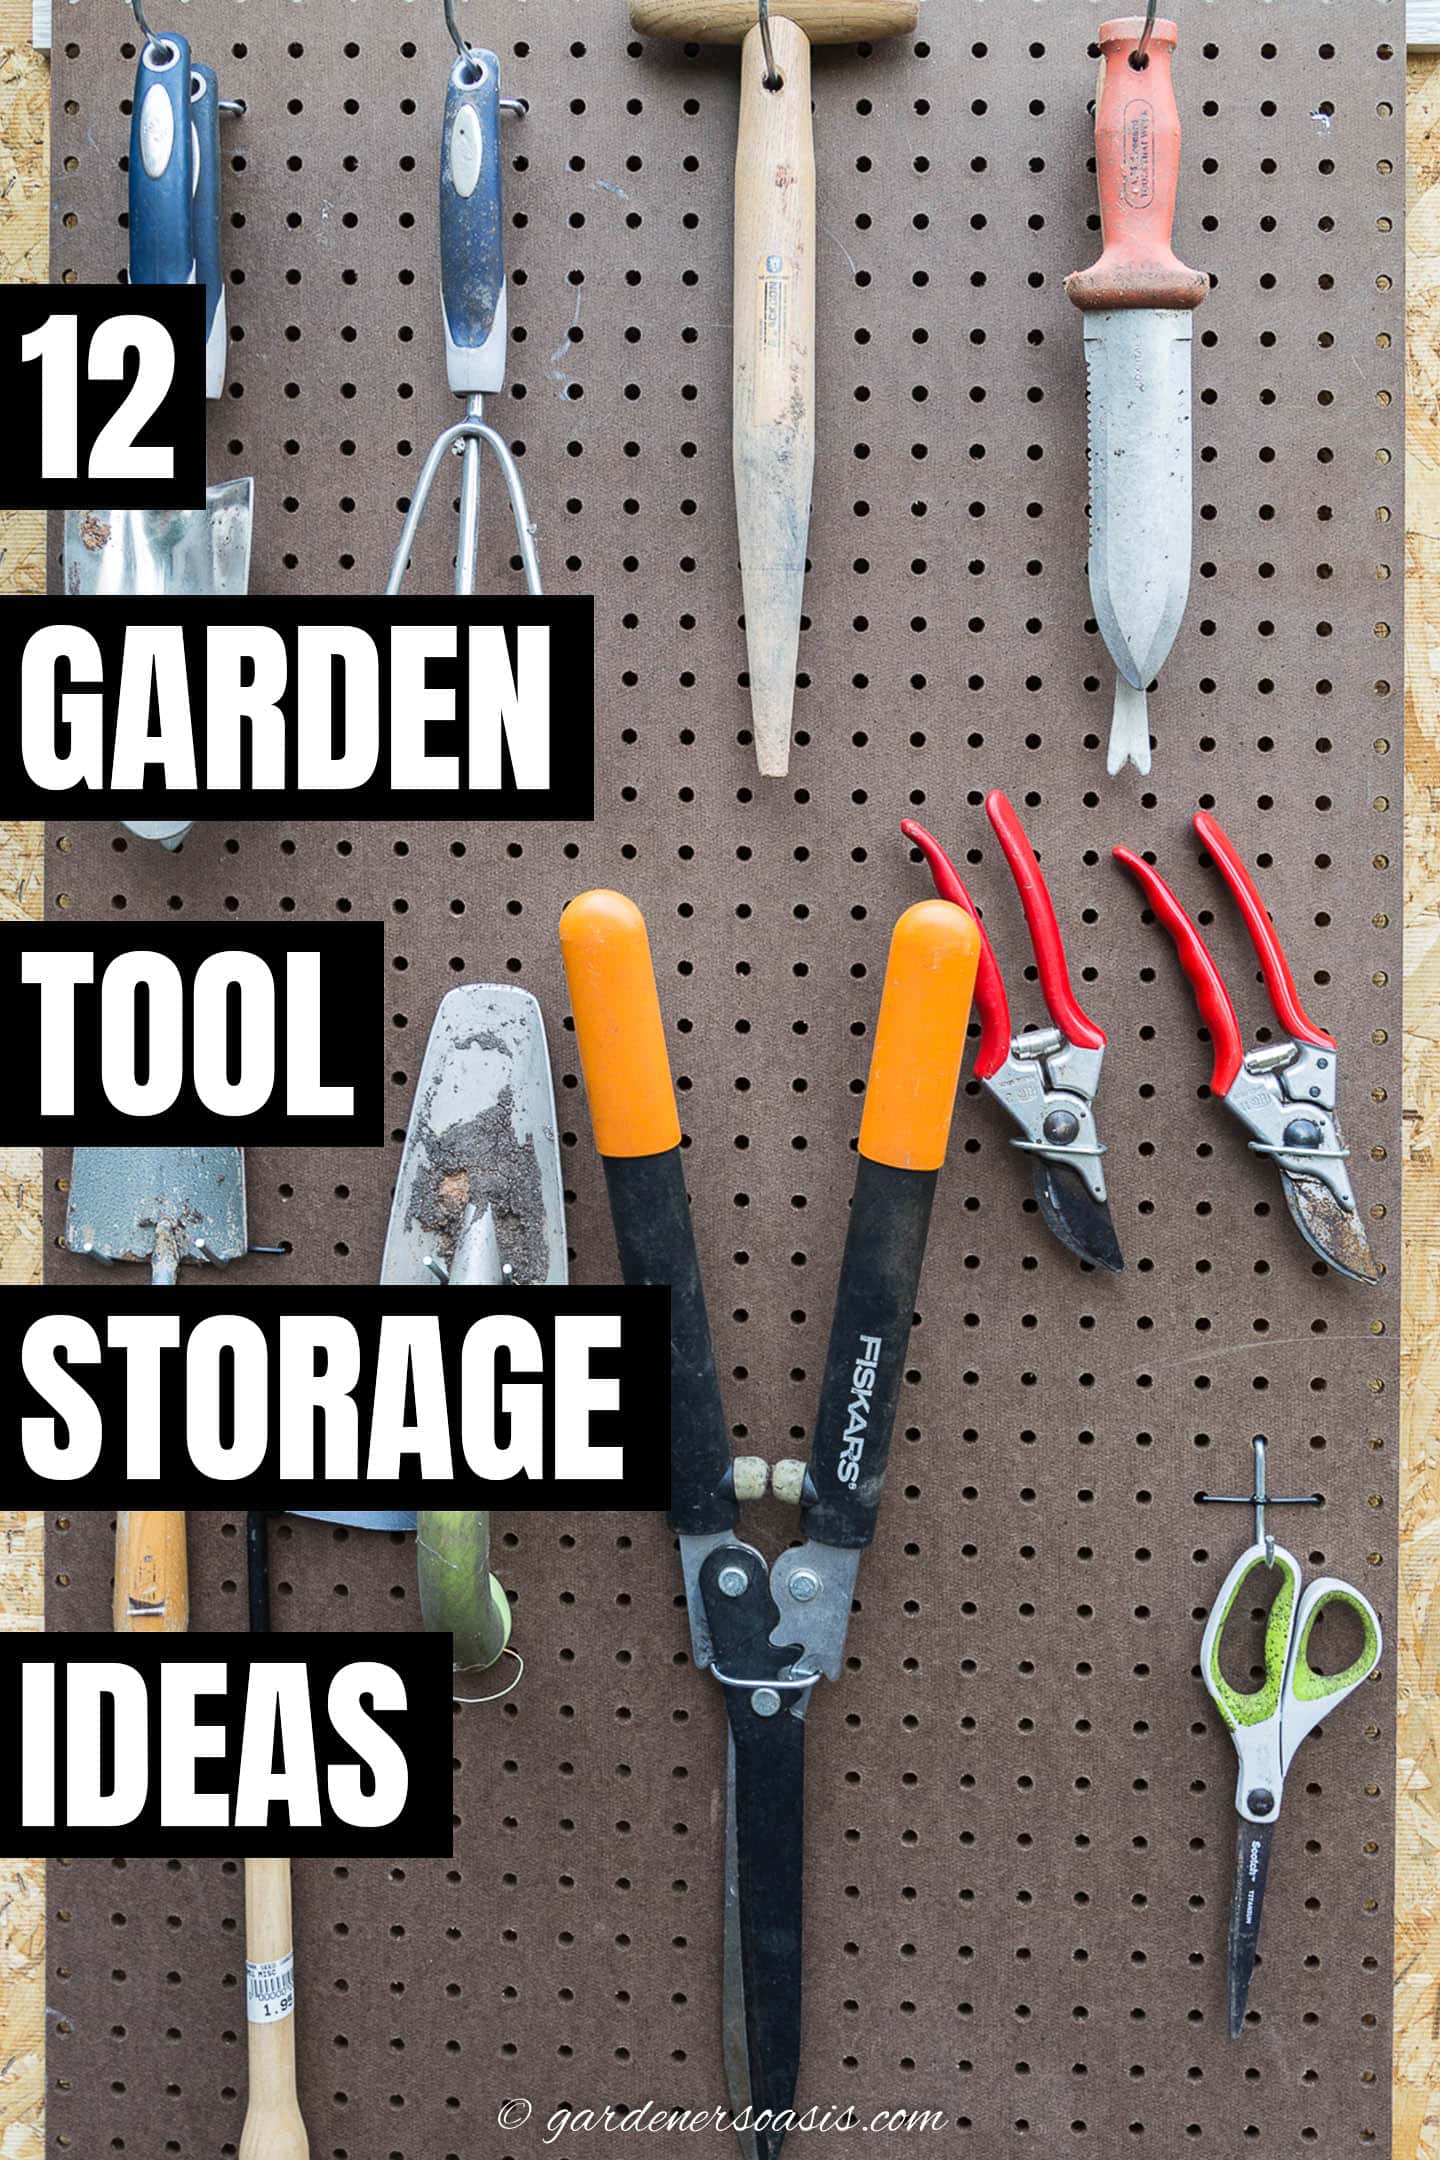 Pegboard with garden tools and the text "12 garden tool storage ideas"